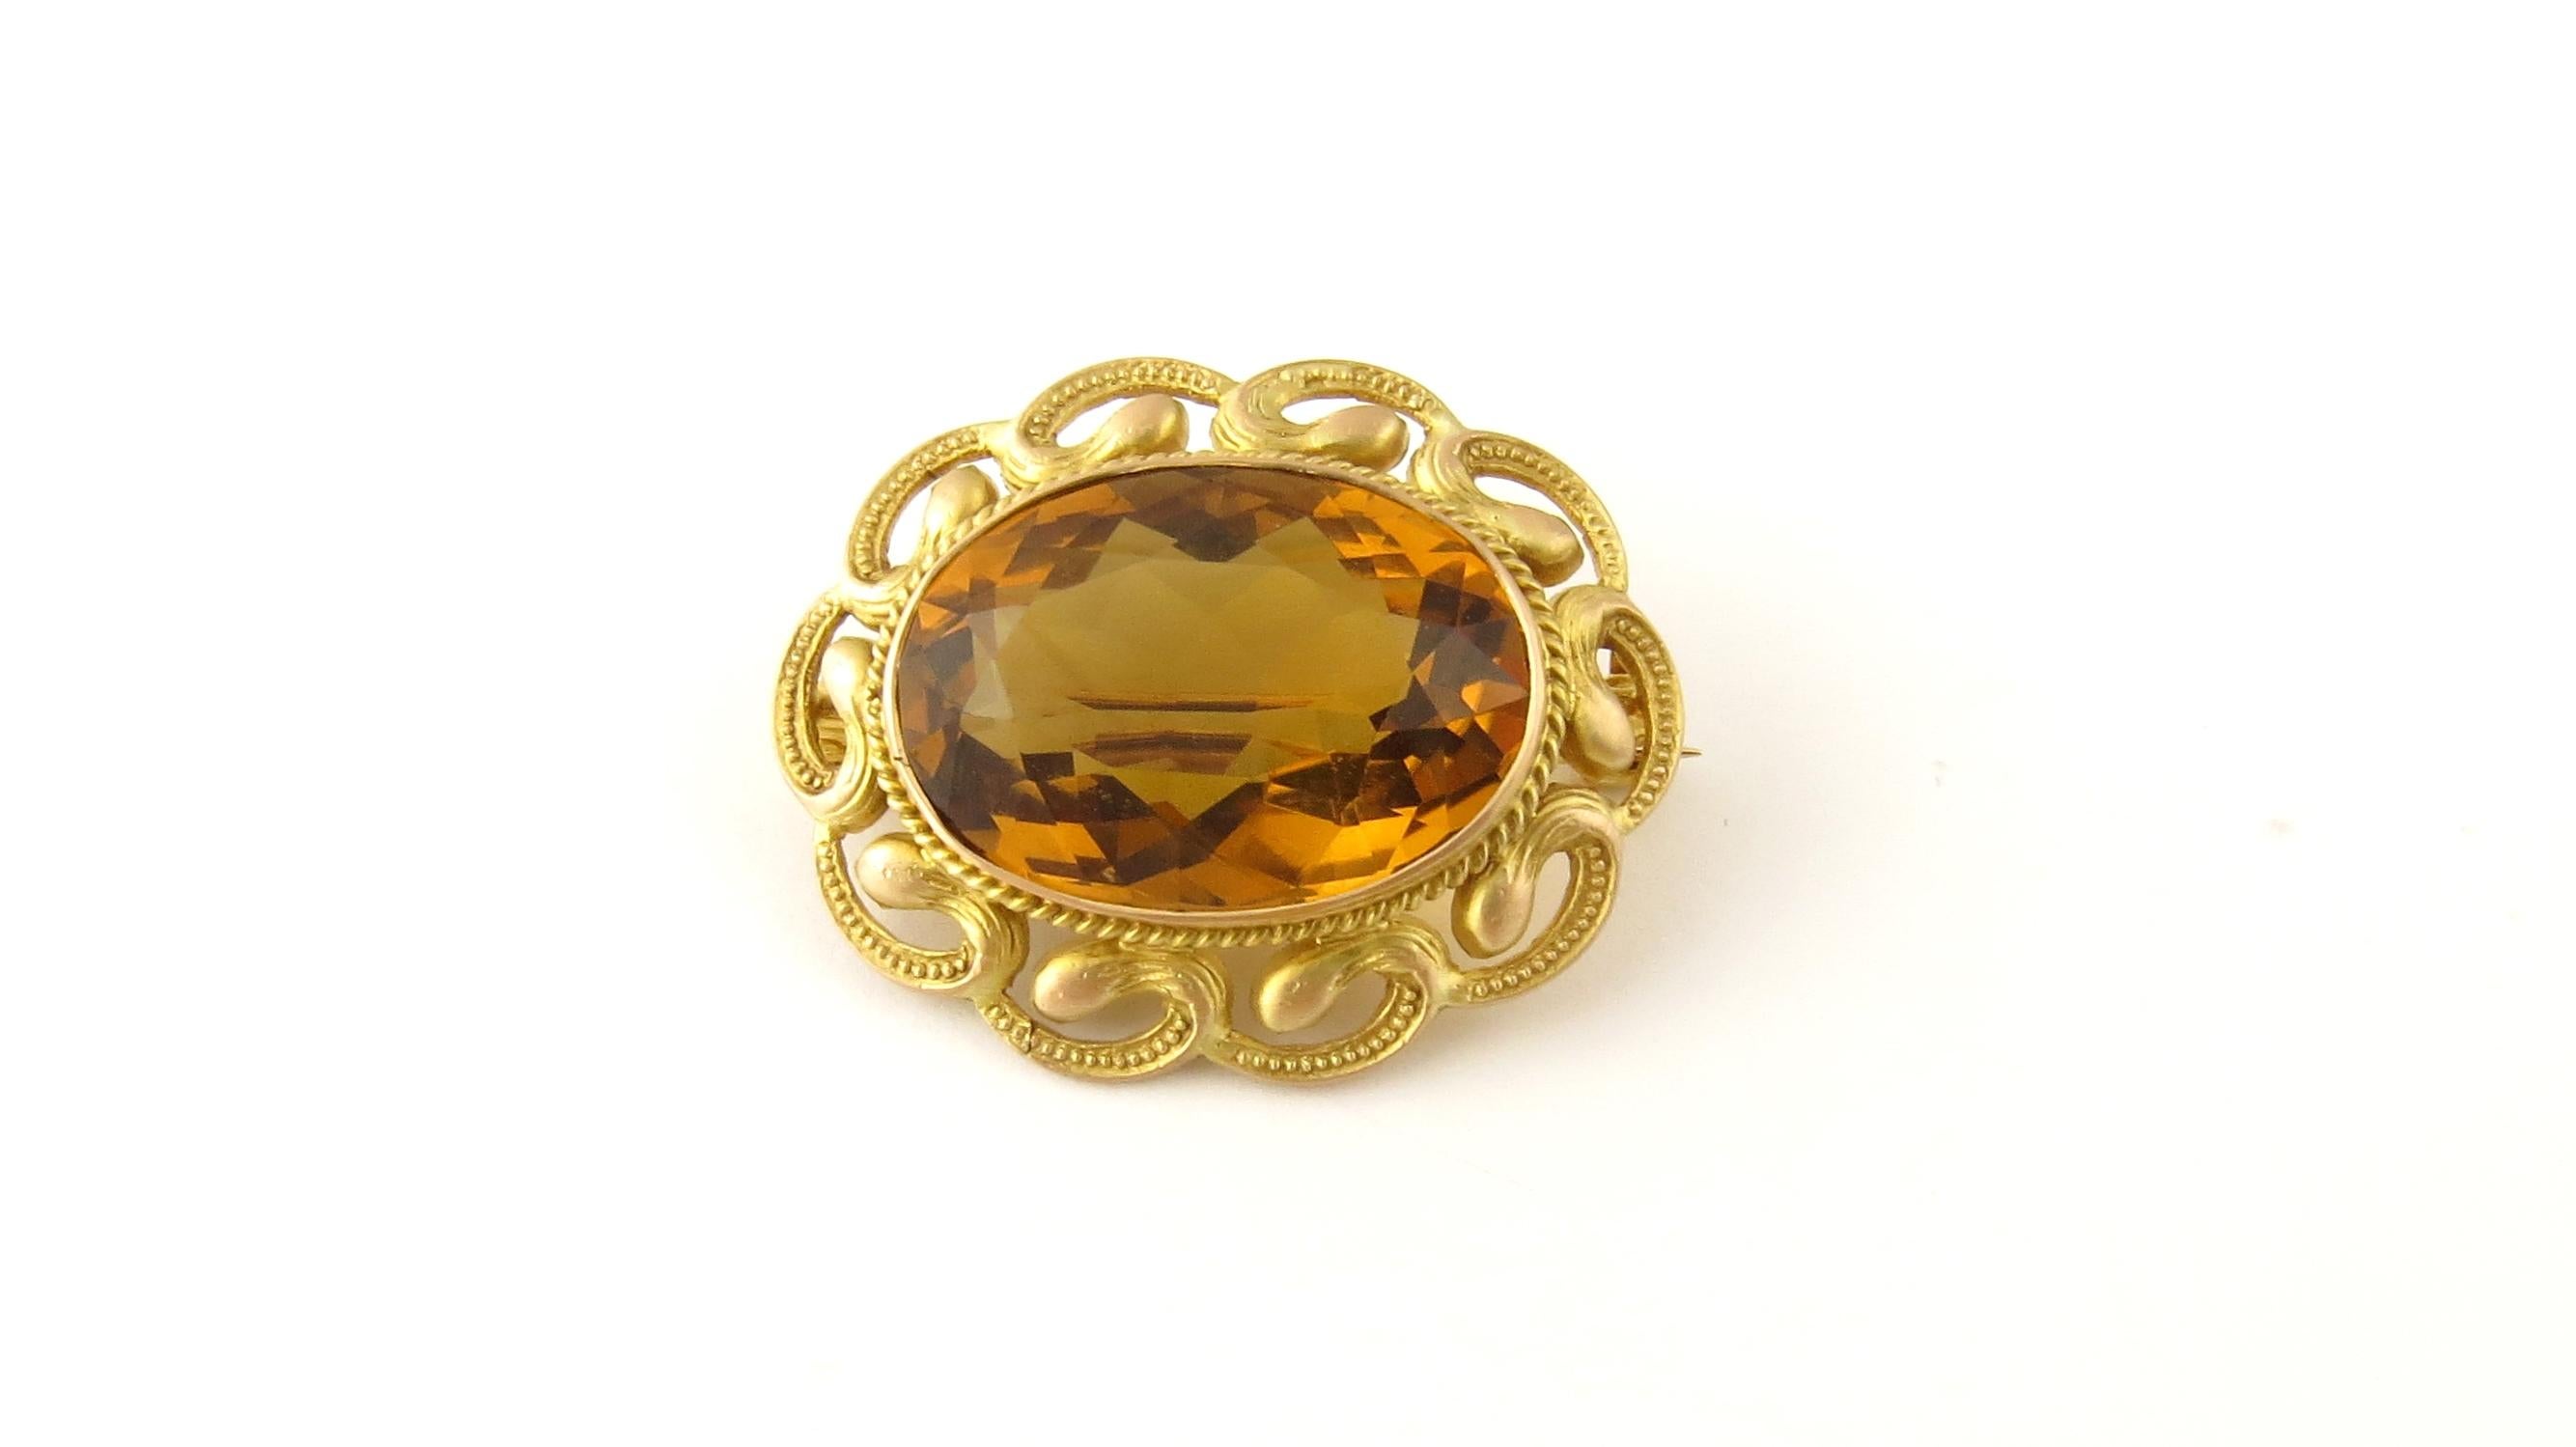 Vintage 14 Karat Yellow Gold Citrine Pin/Brooch

This lovely brooch features one oval citrine (21 mm x 16 mm) framed in beautifully detailed 14K yellow gold.

Size: 29 mm x 23 mm

Weight: 4.8 dwt. / 7.6 gr.

Stamped: 14K

Very good condition,